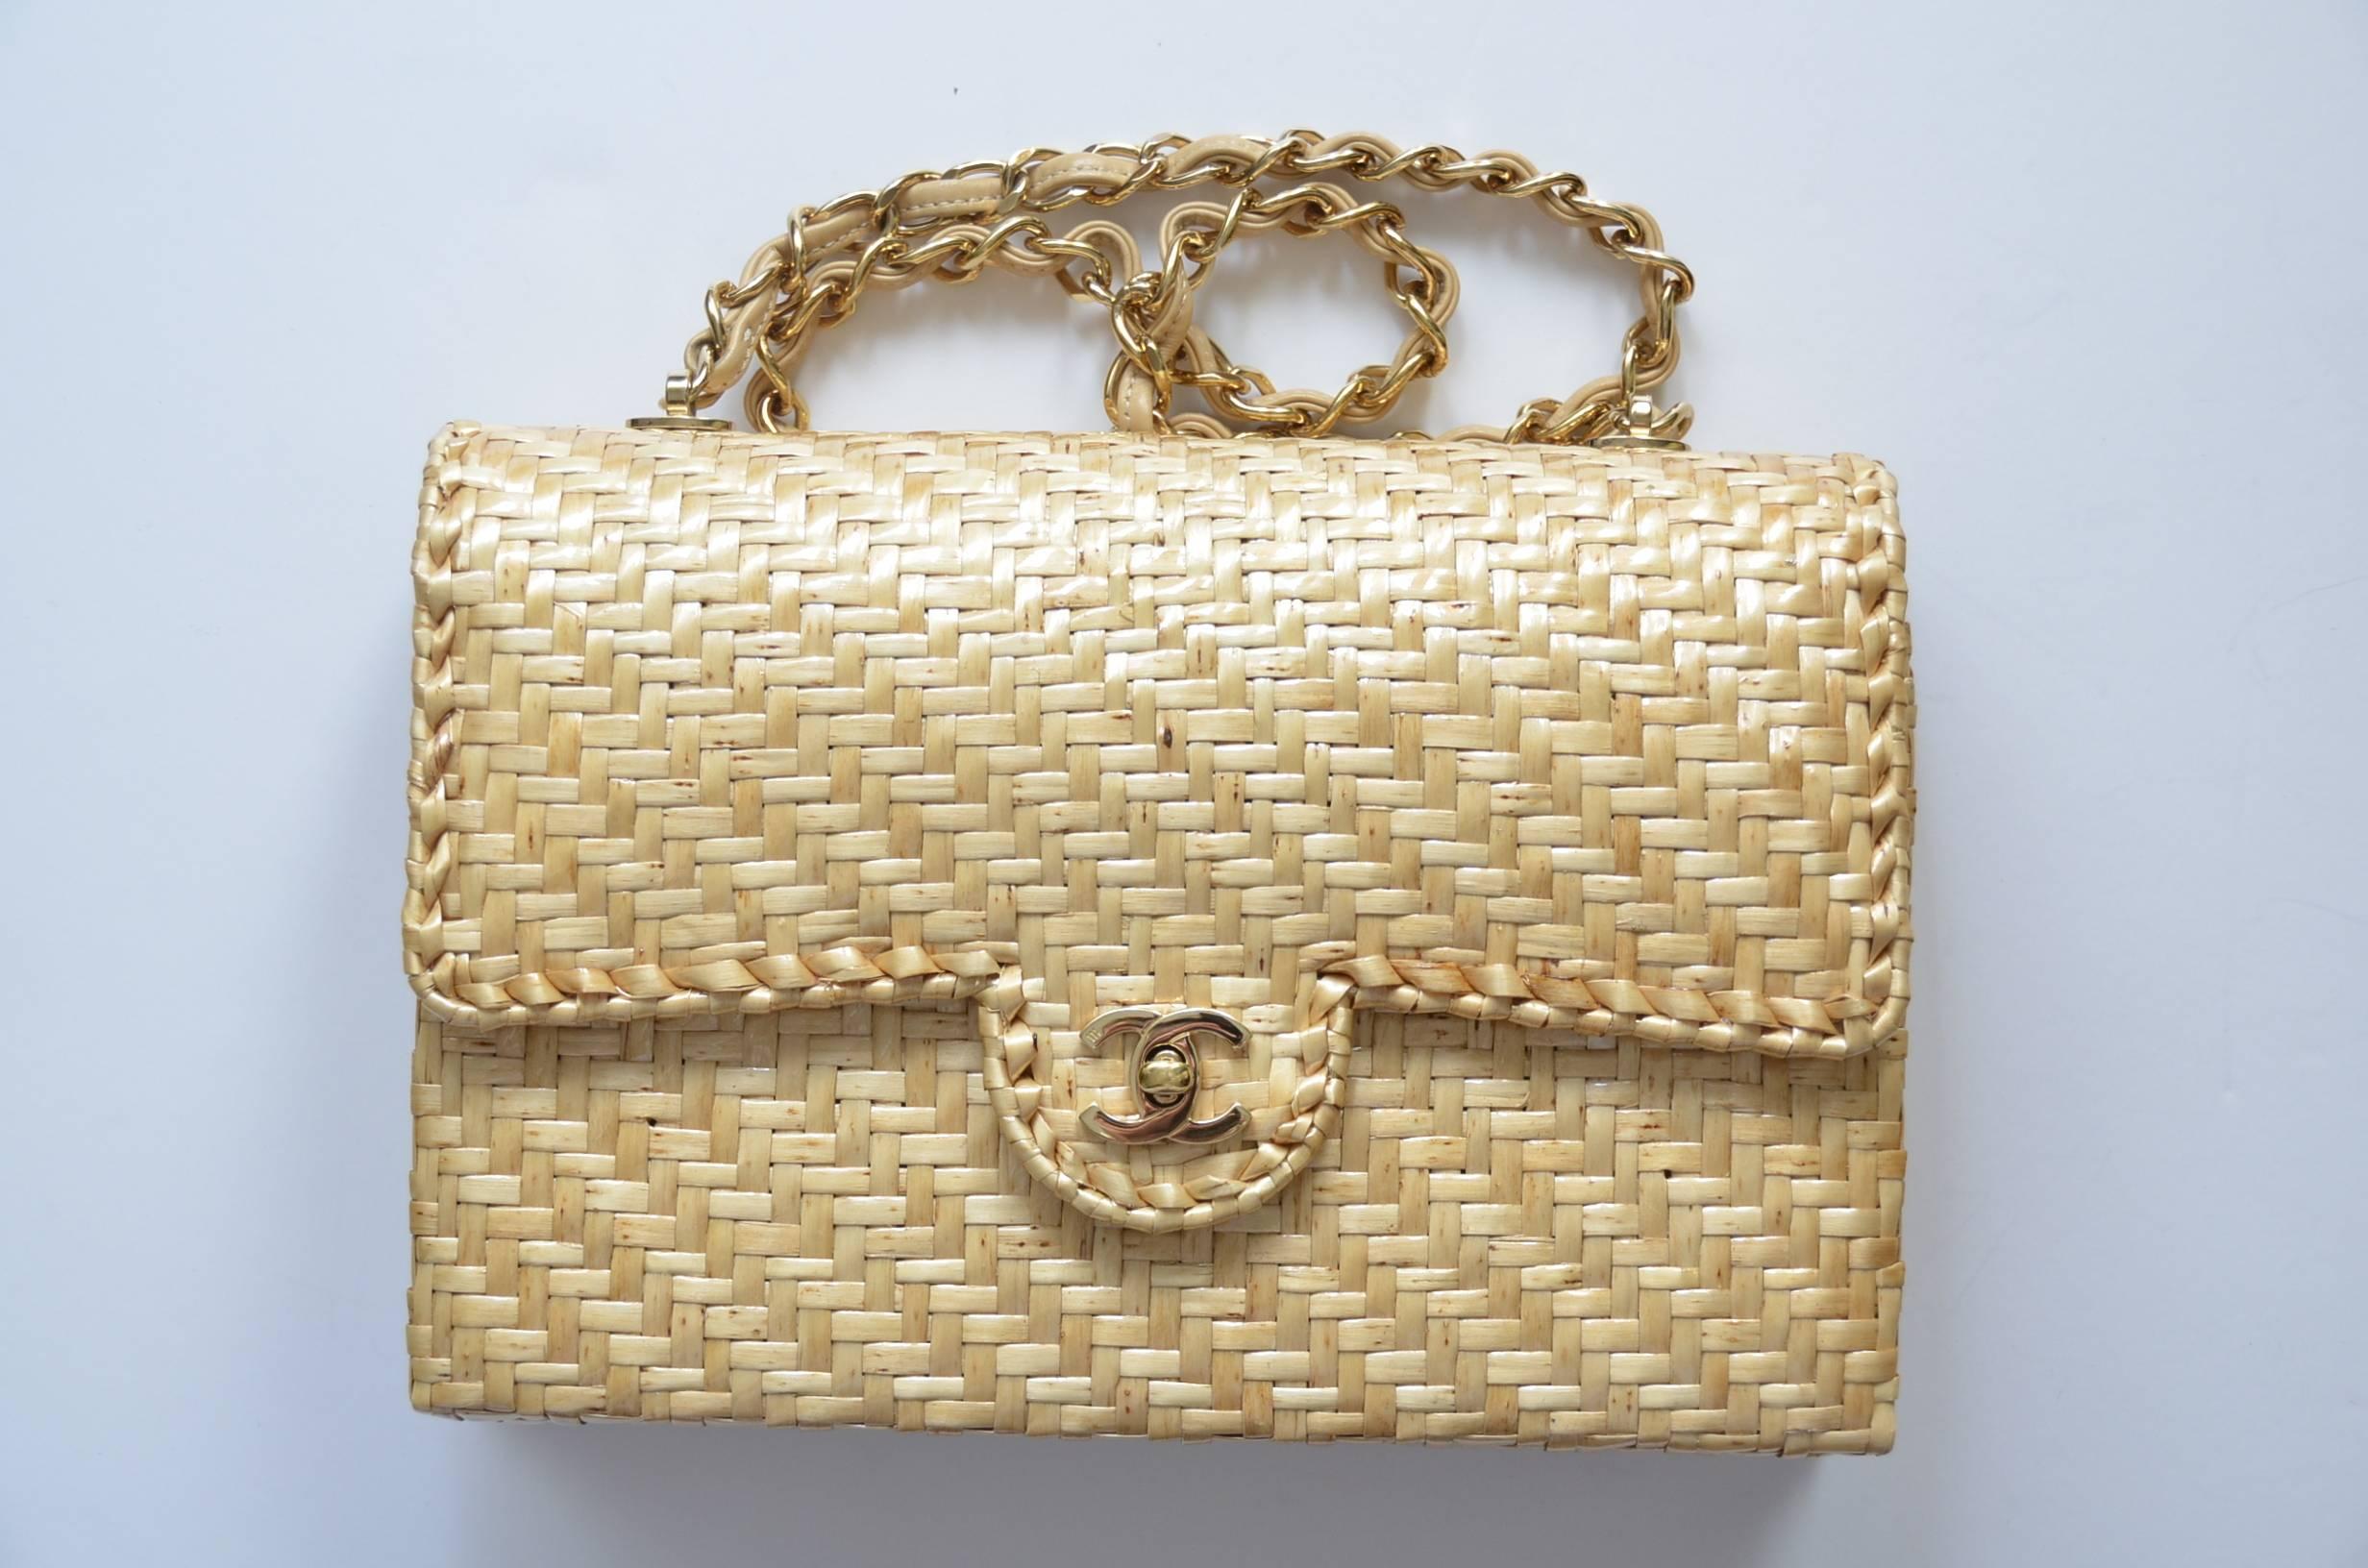 Chanel natural straw color handbag.
Excellent mint condition.Looks new.
Clean inside out.Lined inside in beige satin fabric.gold tone hardware.
Hologram inside with matching card and dust bag included.
Corners are perfect.
Please note:Finish on